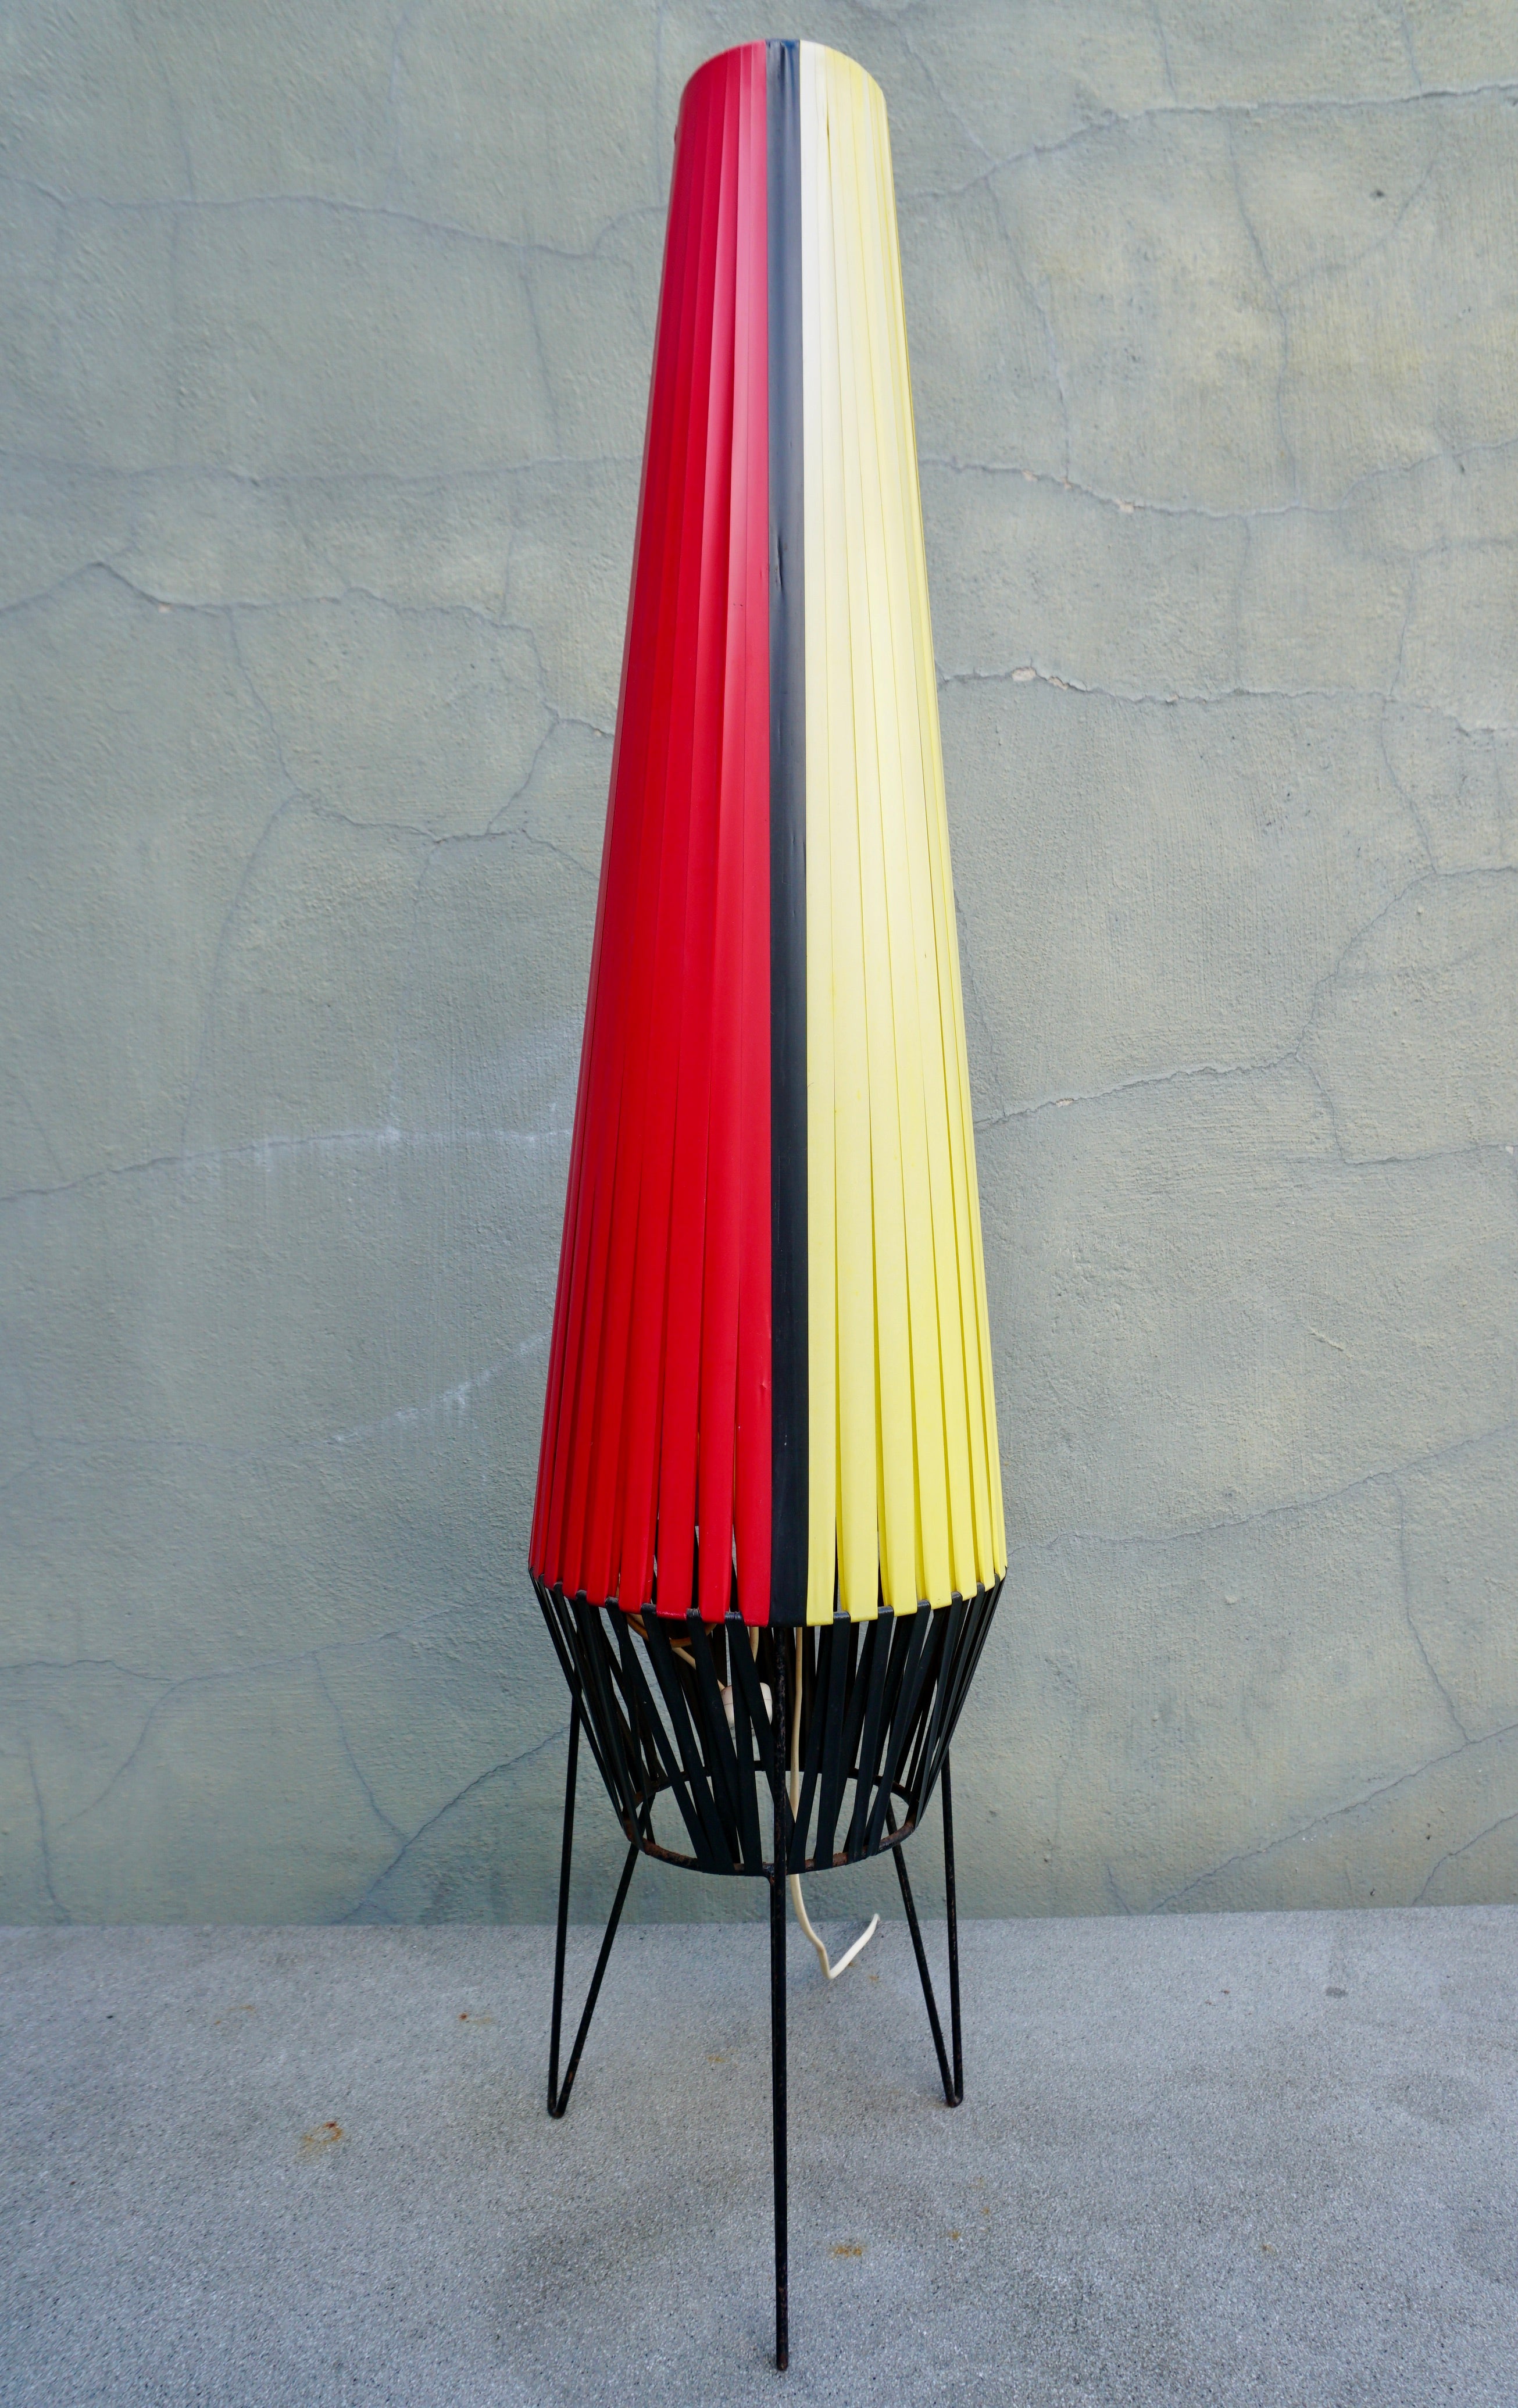 Rocket floor lamp with plastic straps in red, purple, yellow and black on a black metal tripod.

Height 41.3